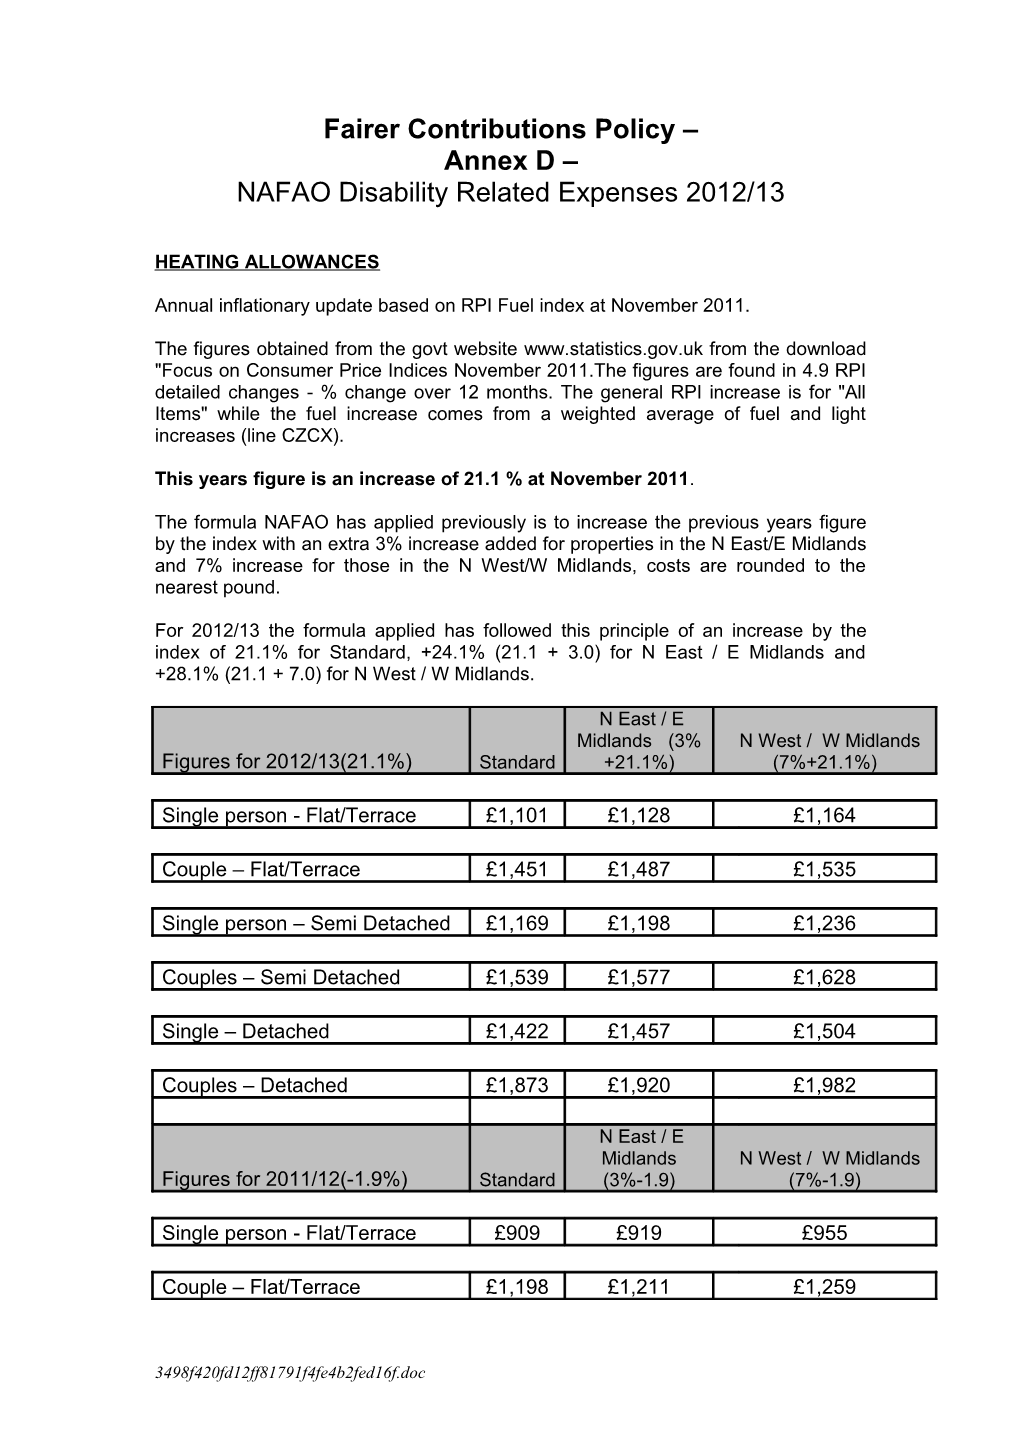 NAFAO Disability Related Expenses 2012/13